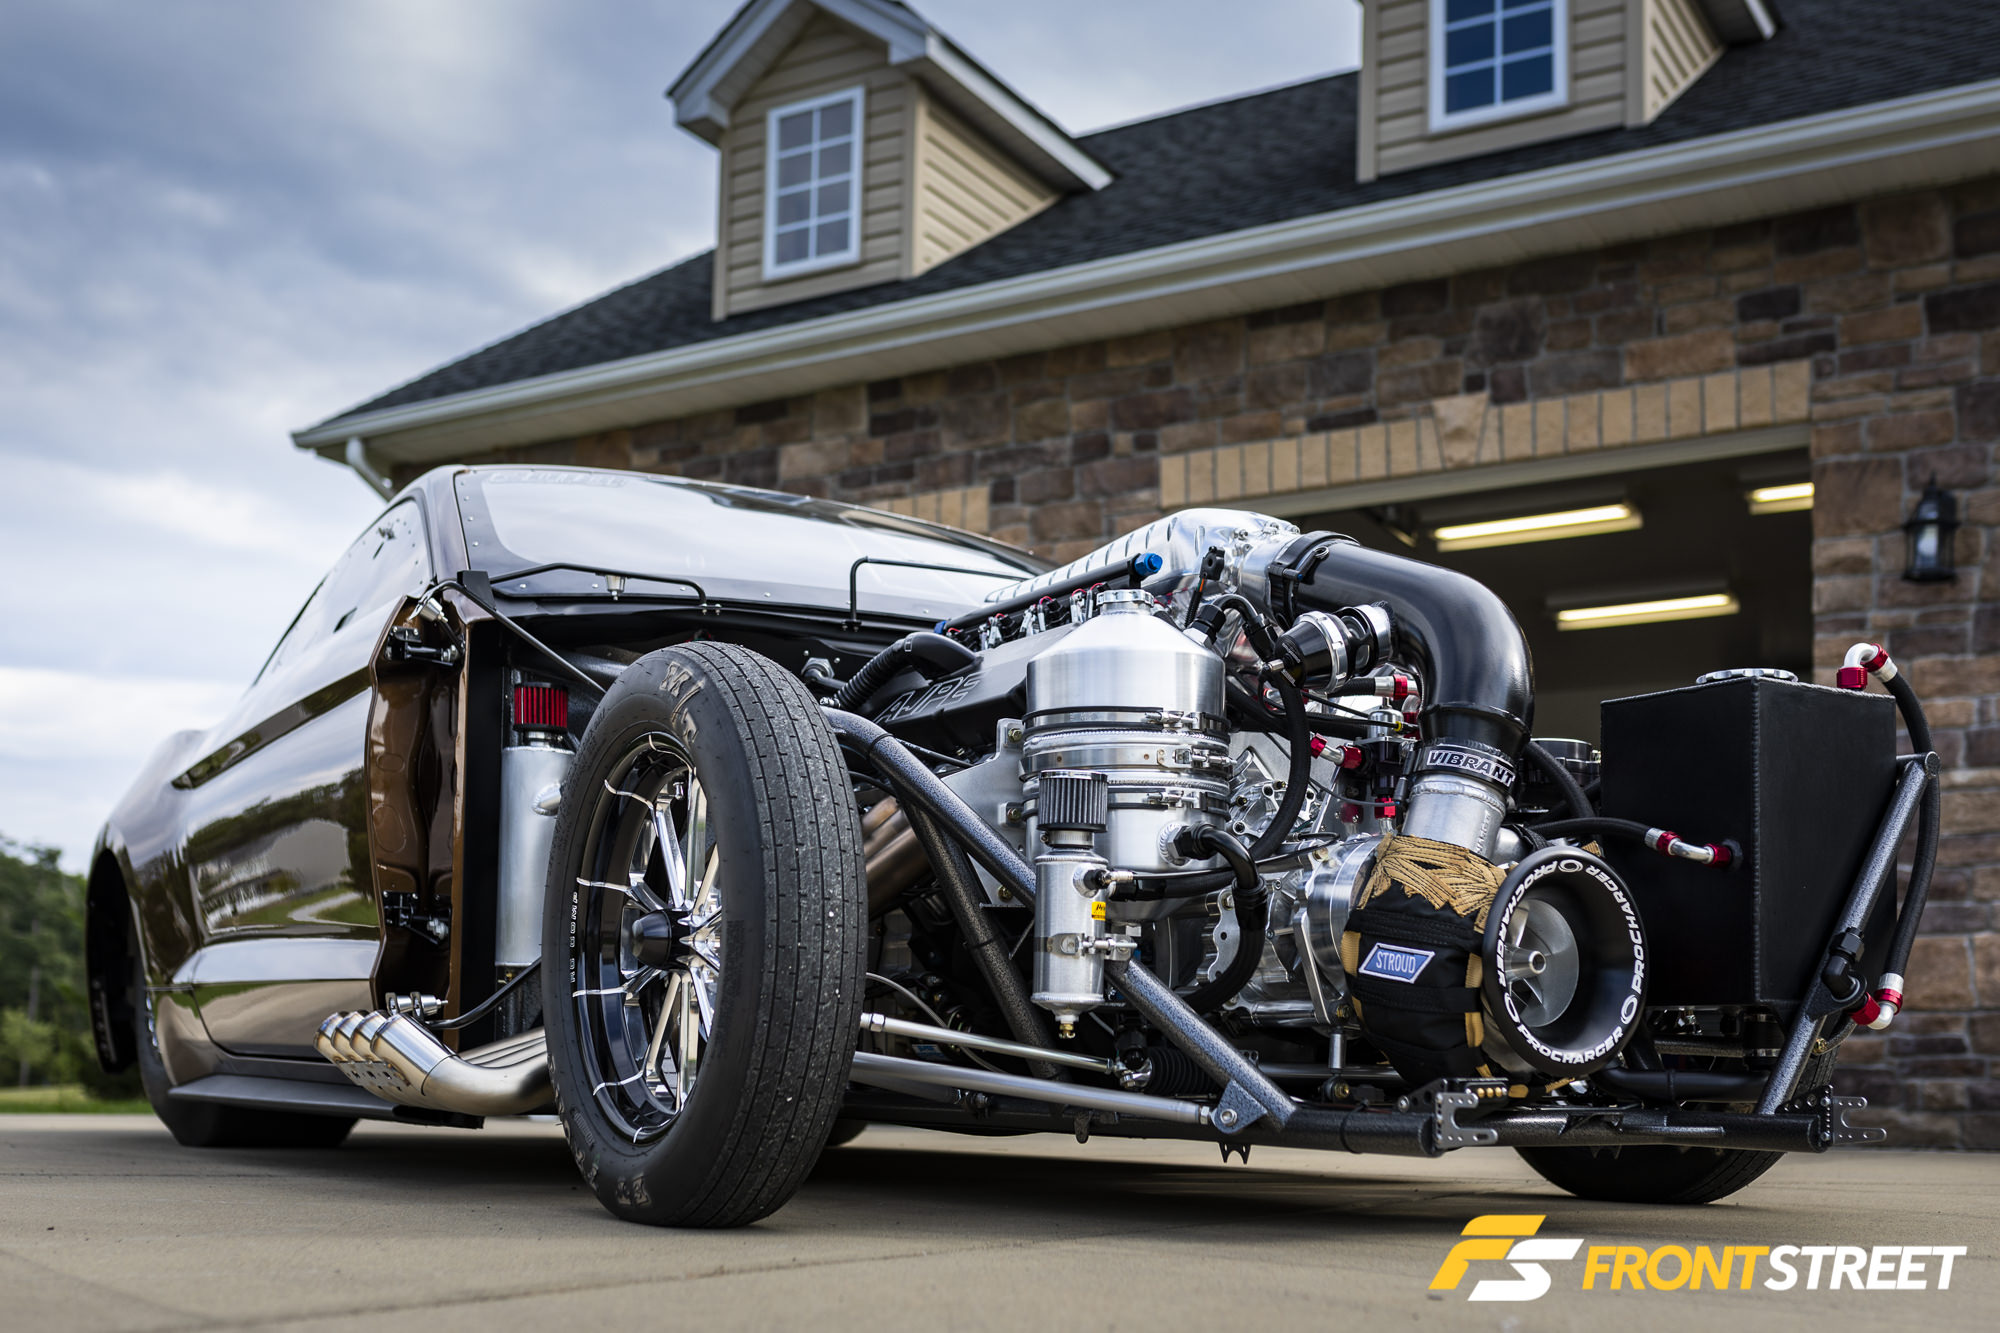 Brown Sugar: Tim Essick’s Immaculate Homebuilt Hot Rod Is Setting Records